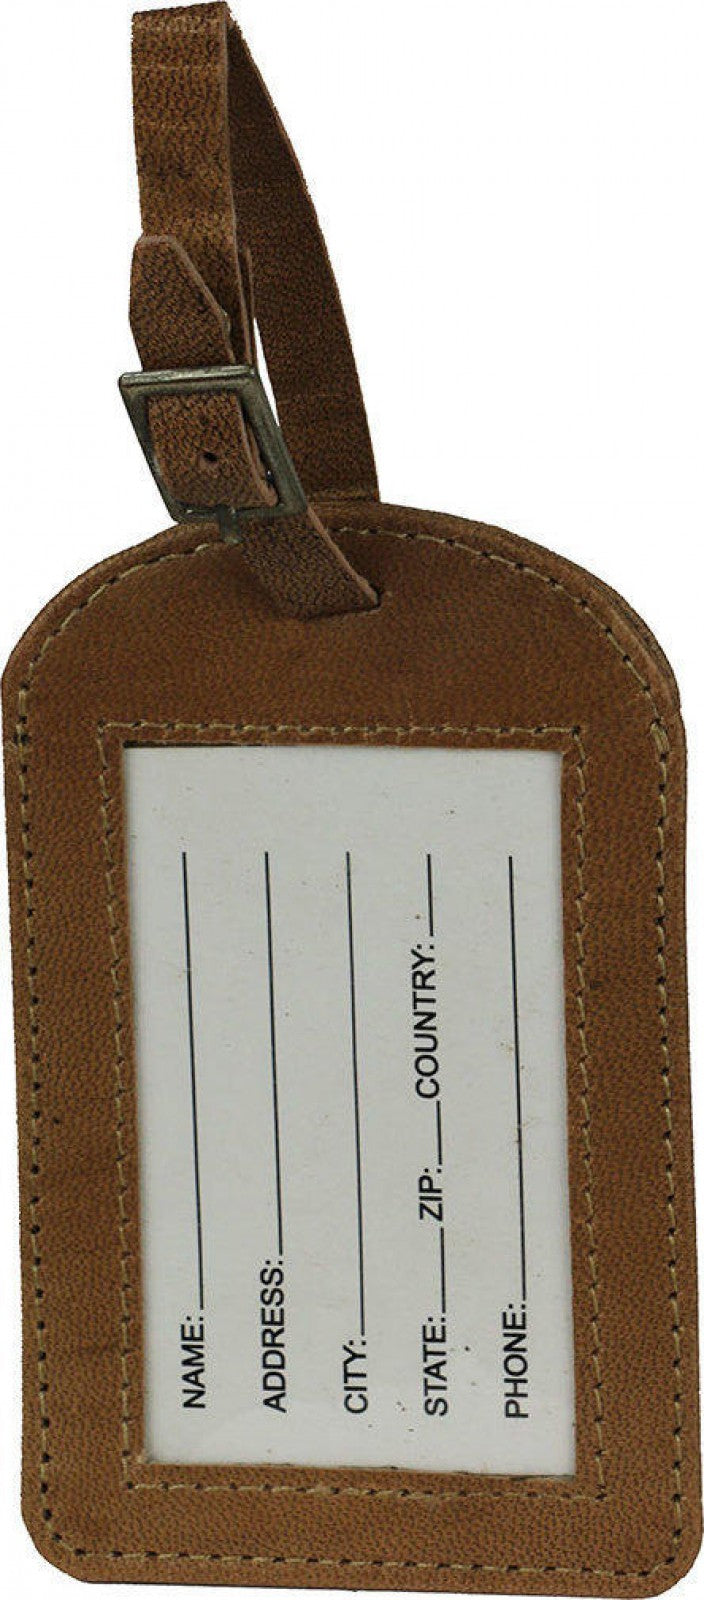 Not all who wander leather luggage tag